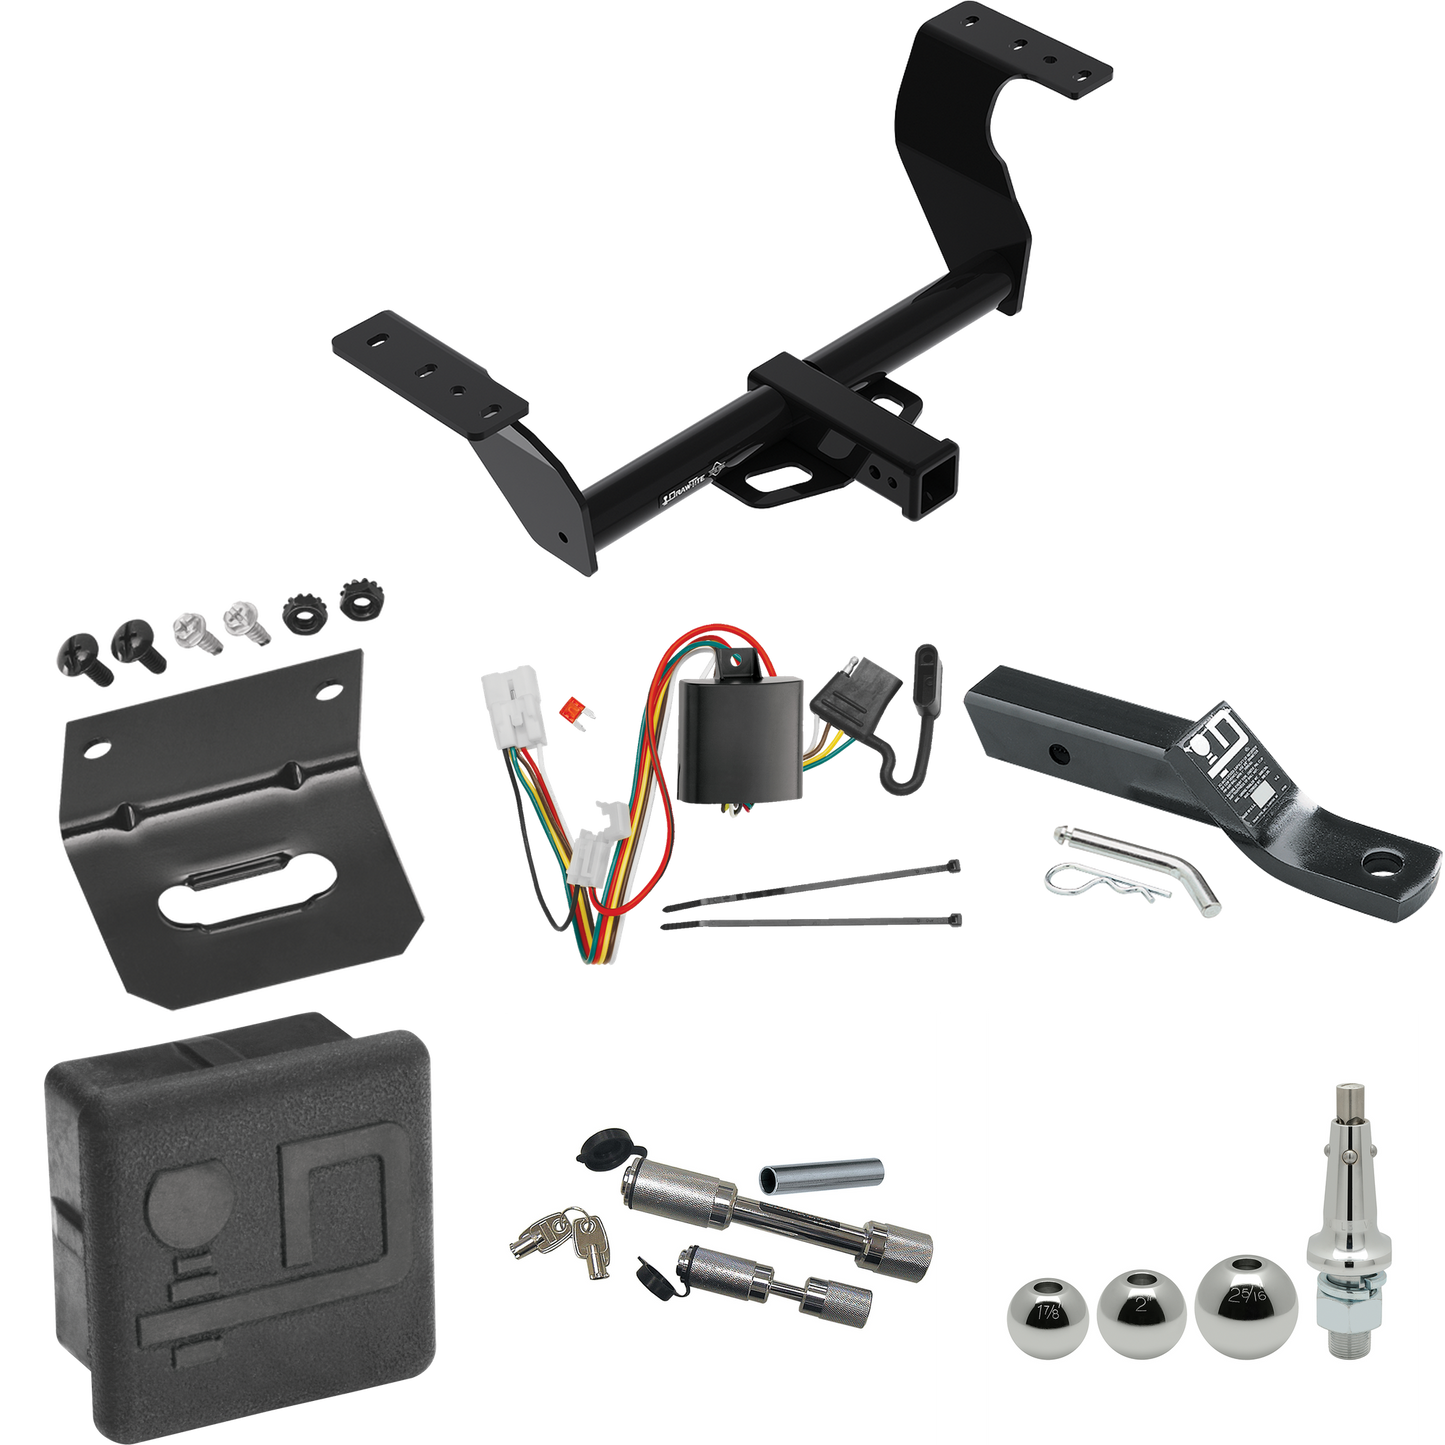 Fits 2019-2022 Subaru Forester Trailer Hitch Tow PKG w/ 4-Flat Wiring + Ball Mount w/ 2" Drop + Interchangeable Ball 1-7/8" & 2" & 2-5/16" + Wiring Bracket + Dual Hitch & Coupler Locks + Hitch Cover By Draw-Tite